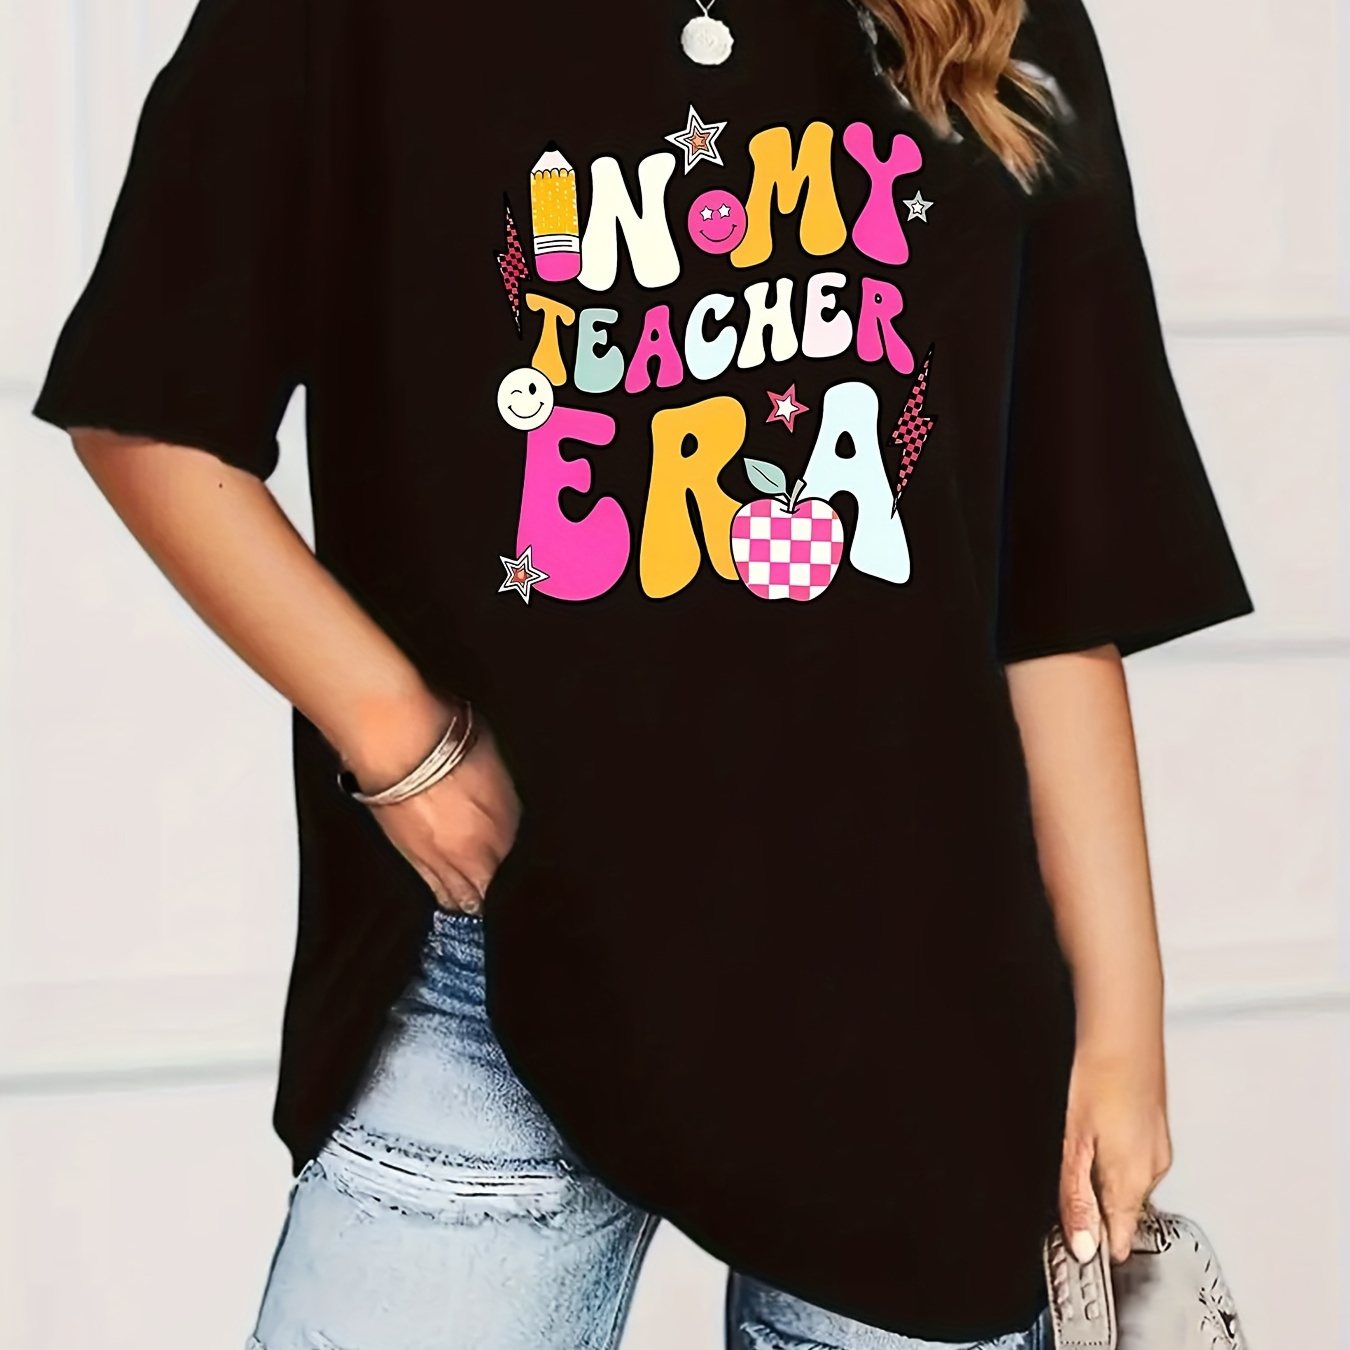 

Women's Fashion Casual Short Sleeve Loose T-shirt, Colorful "in My Teacher Era" Print, Comfortable Relaxed Fit For Everyday Wear